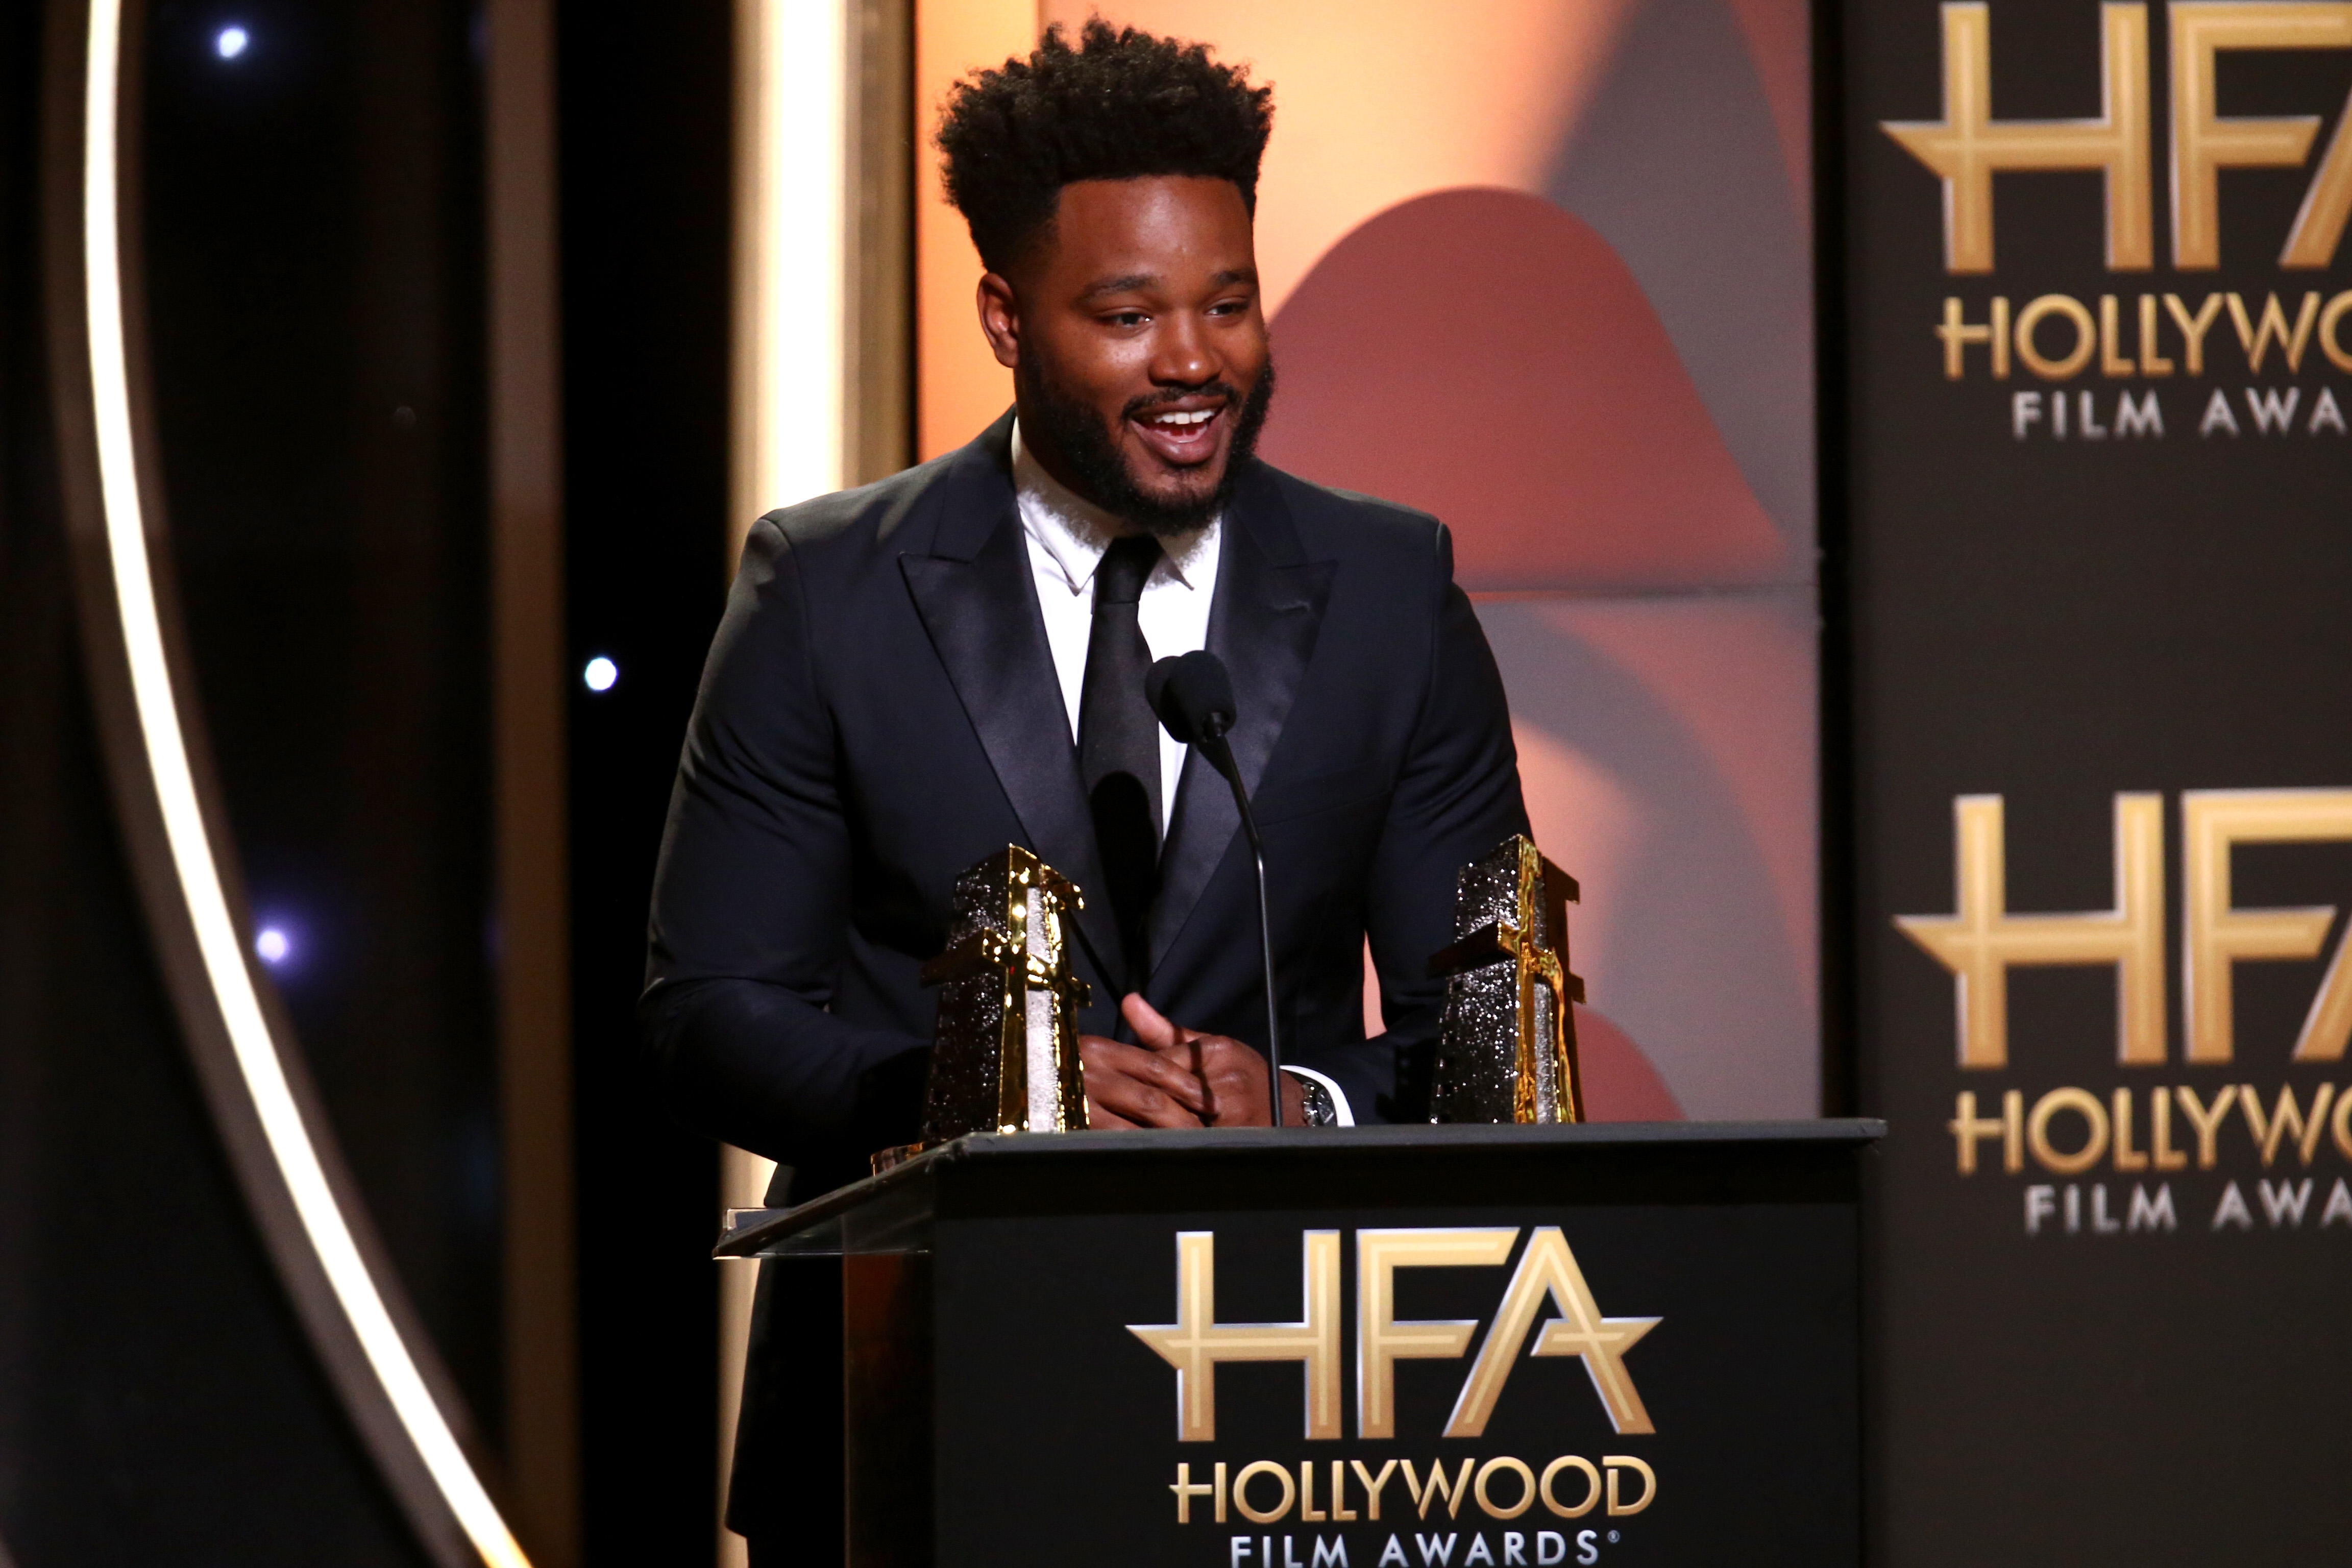 Ryan Coogler accepts the Hollywood Film Award for 